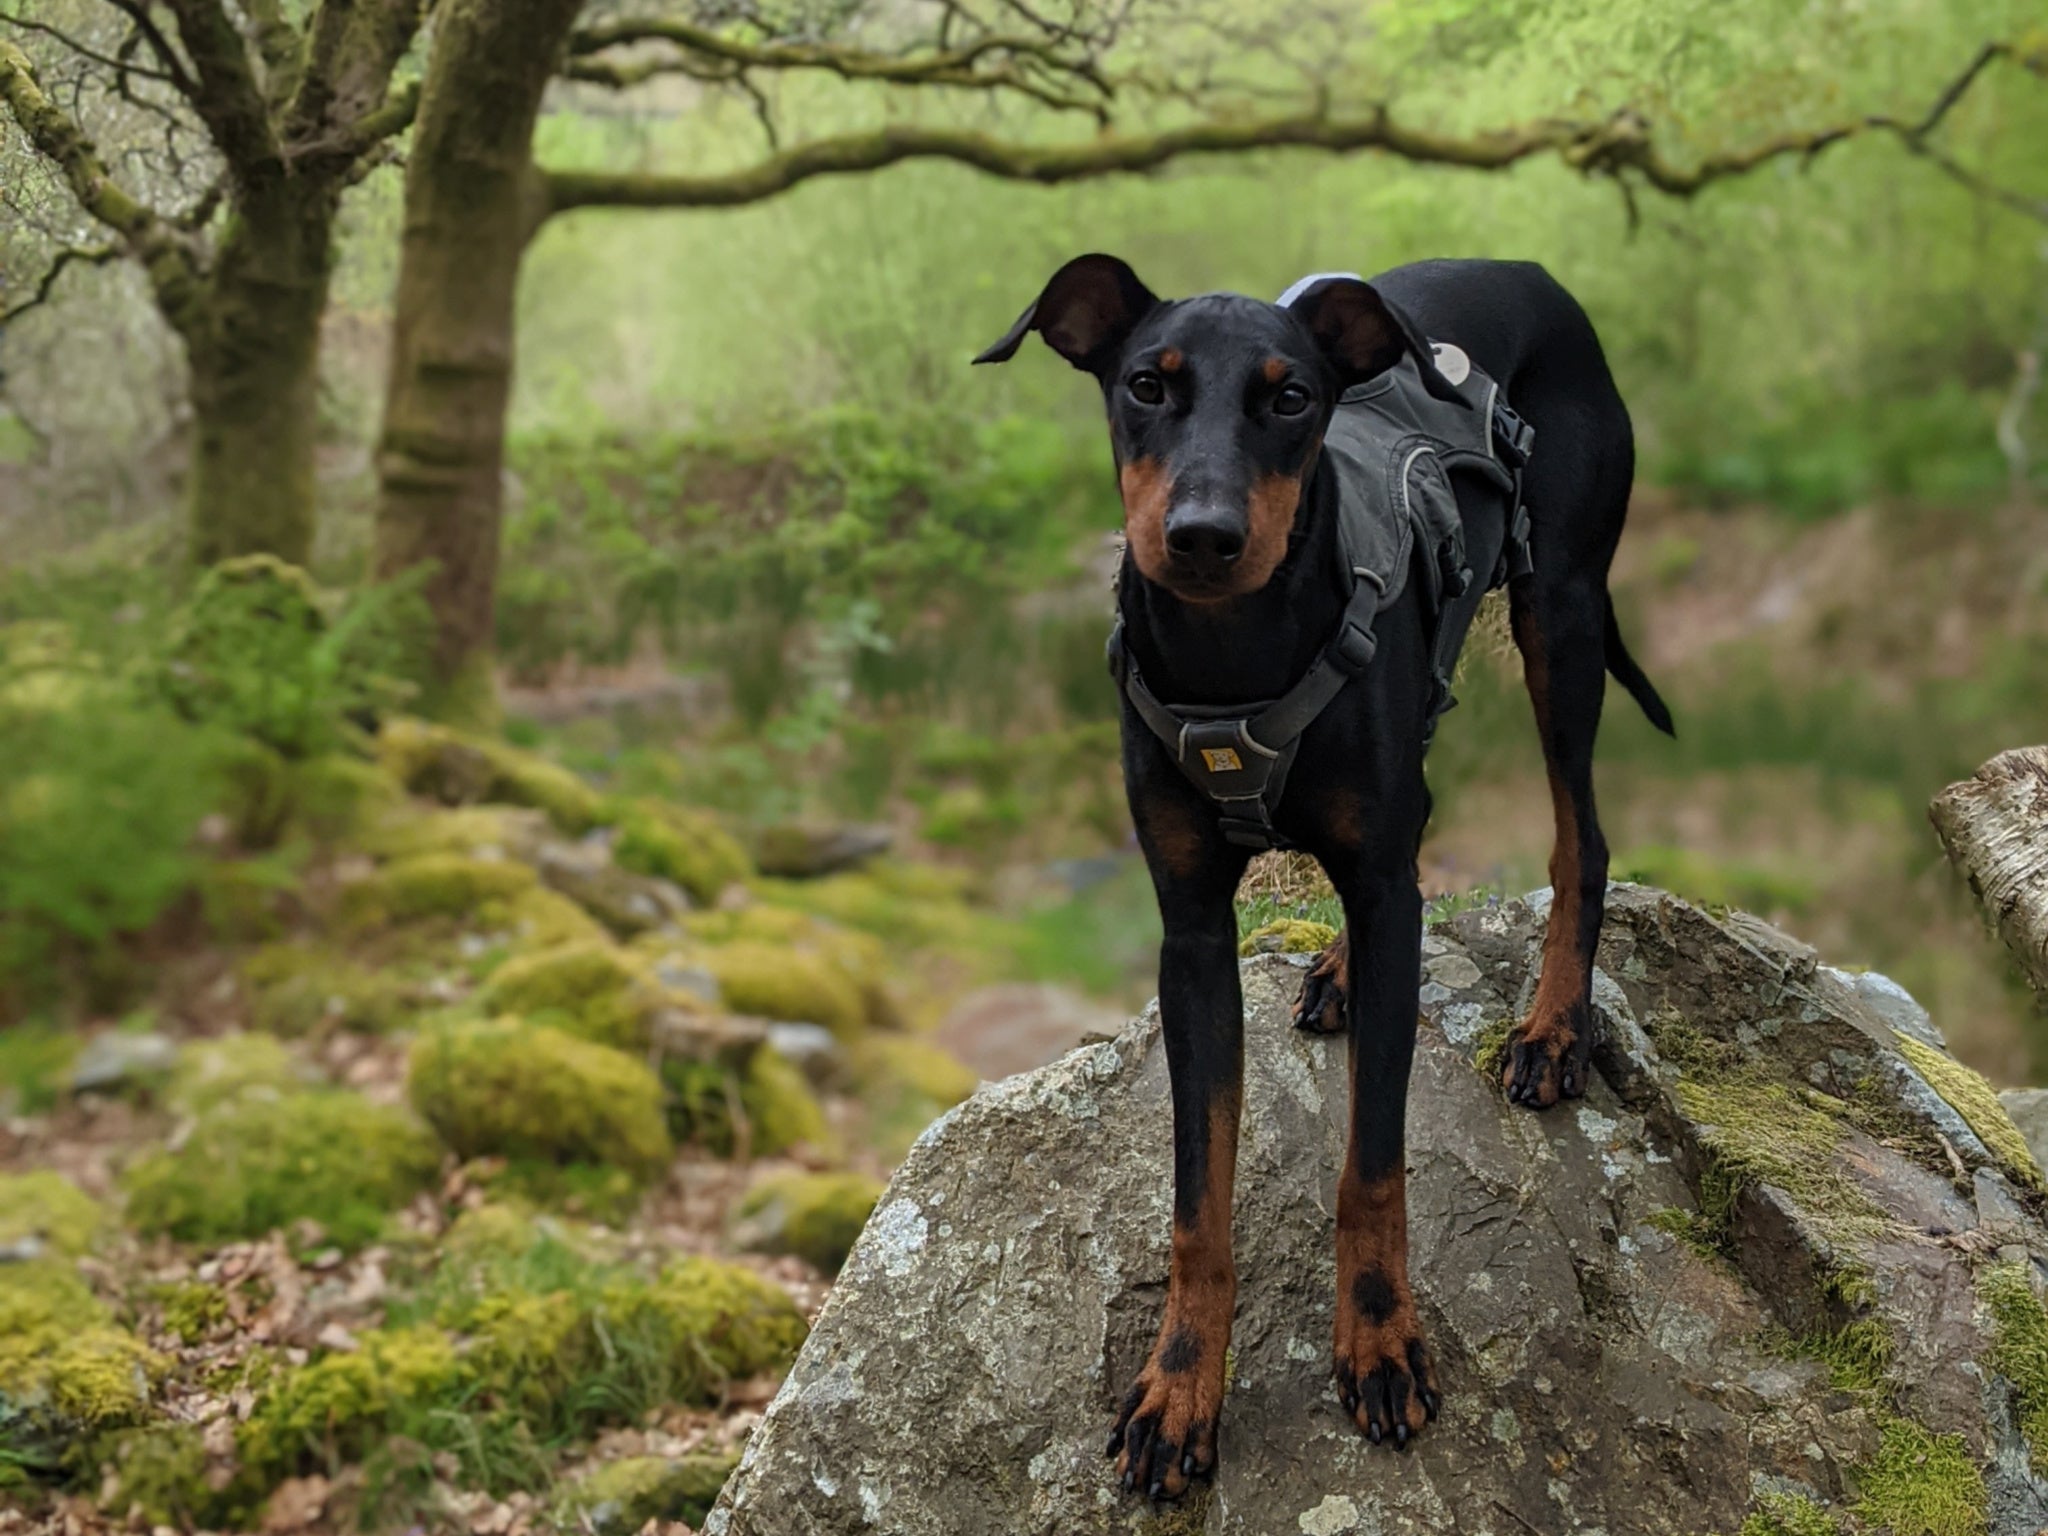 Snowdonia offers excellent walking opportunities and cosy dog-friendly hotels where you can rest weary legs